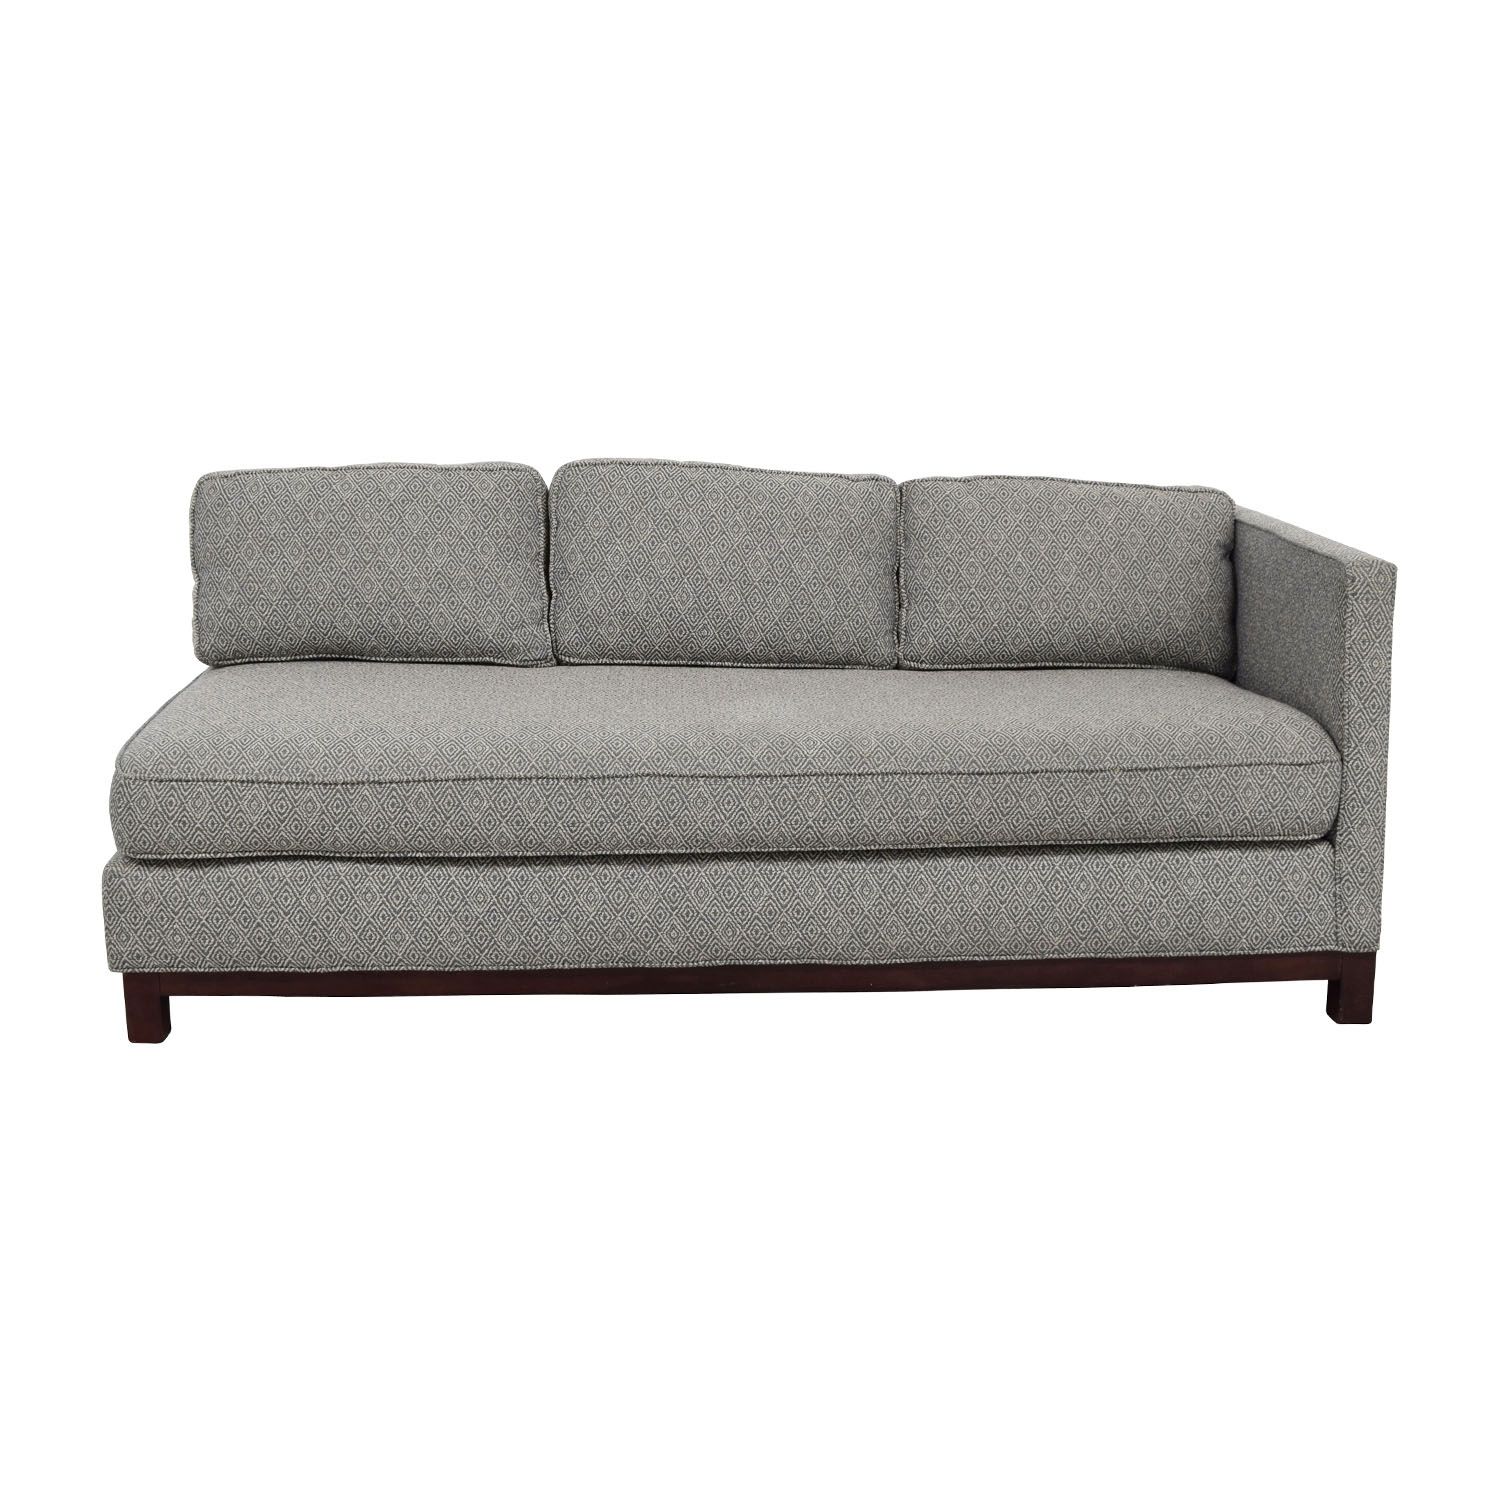 36% Off – Mitchell Gold Mitchell Gold Clifton Sofa / Sofas For Mitchell Gold Sofas (View 6 of 10)